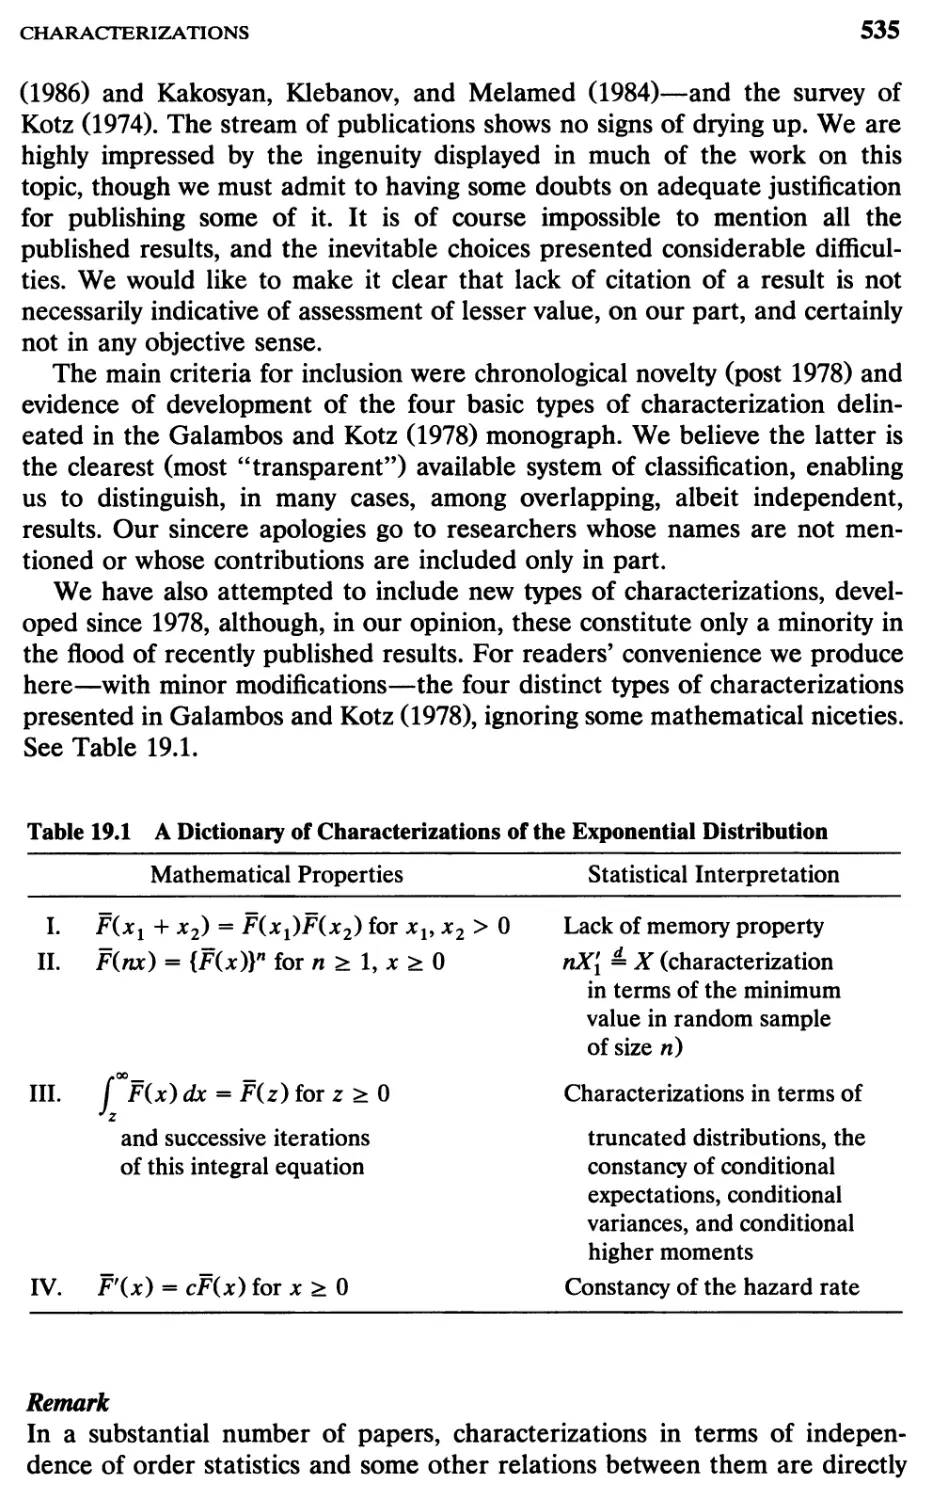 TABLE 19.1 A dictionary of characterizations of the exponentialdistribution 535